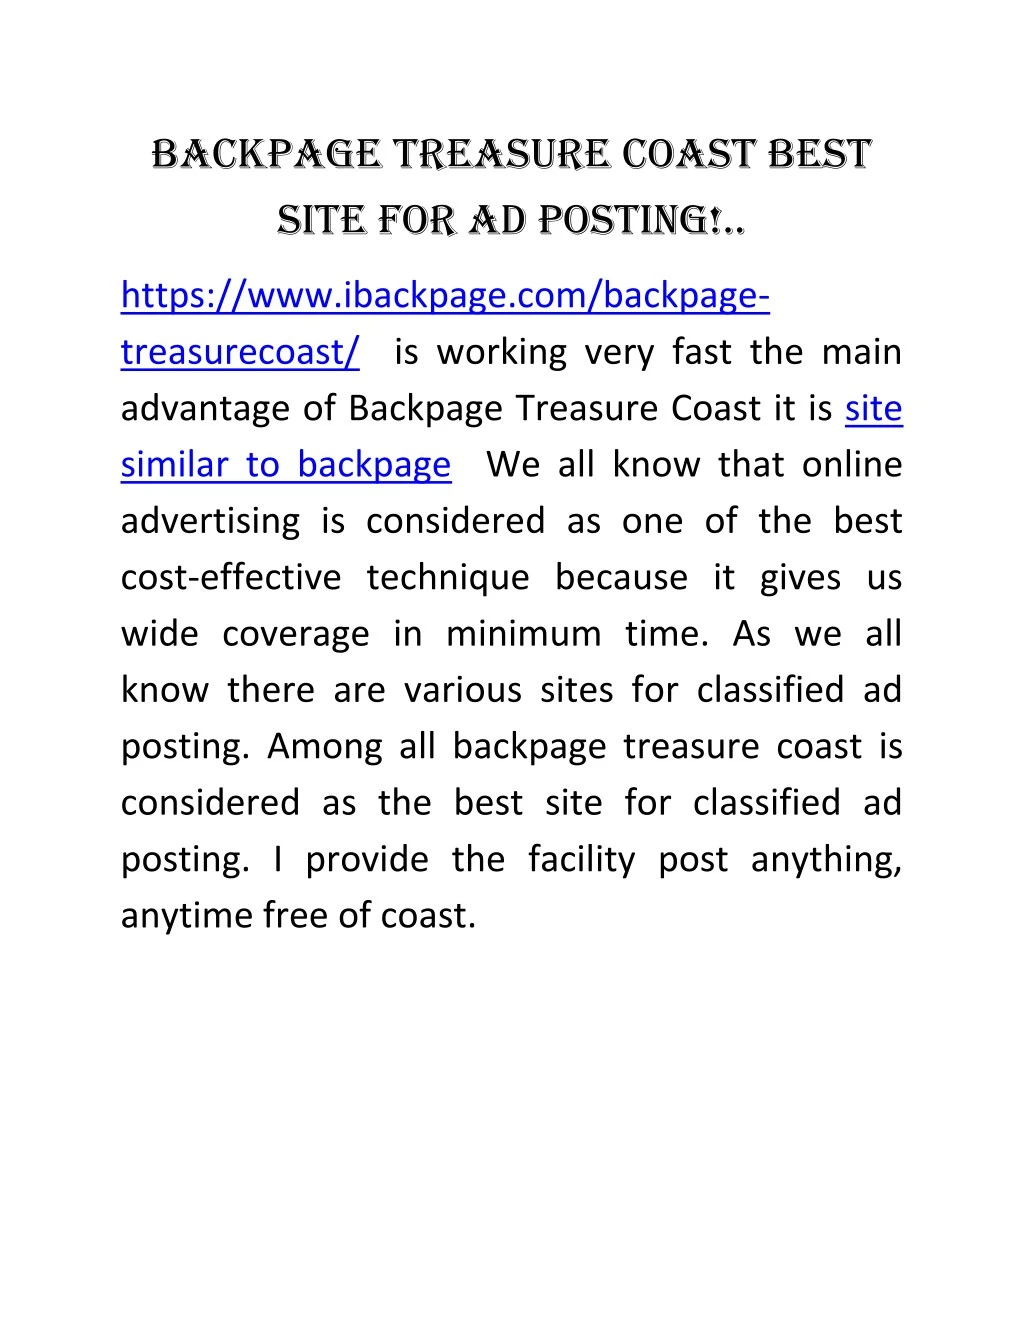 backpage treasure coast best site for ad posting